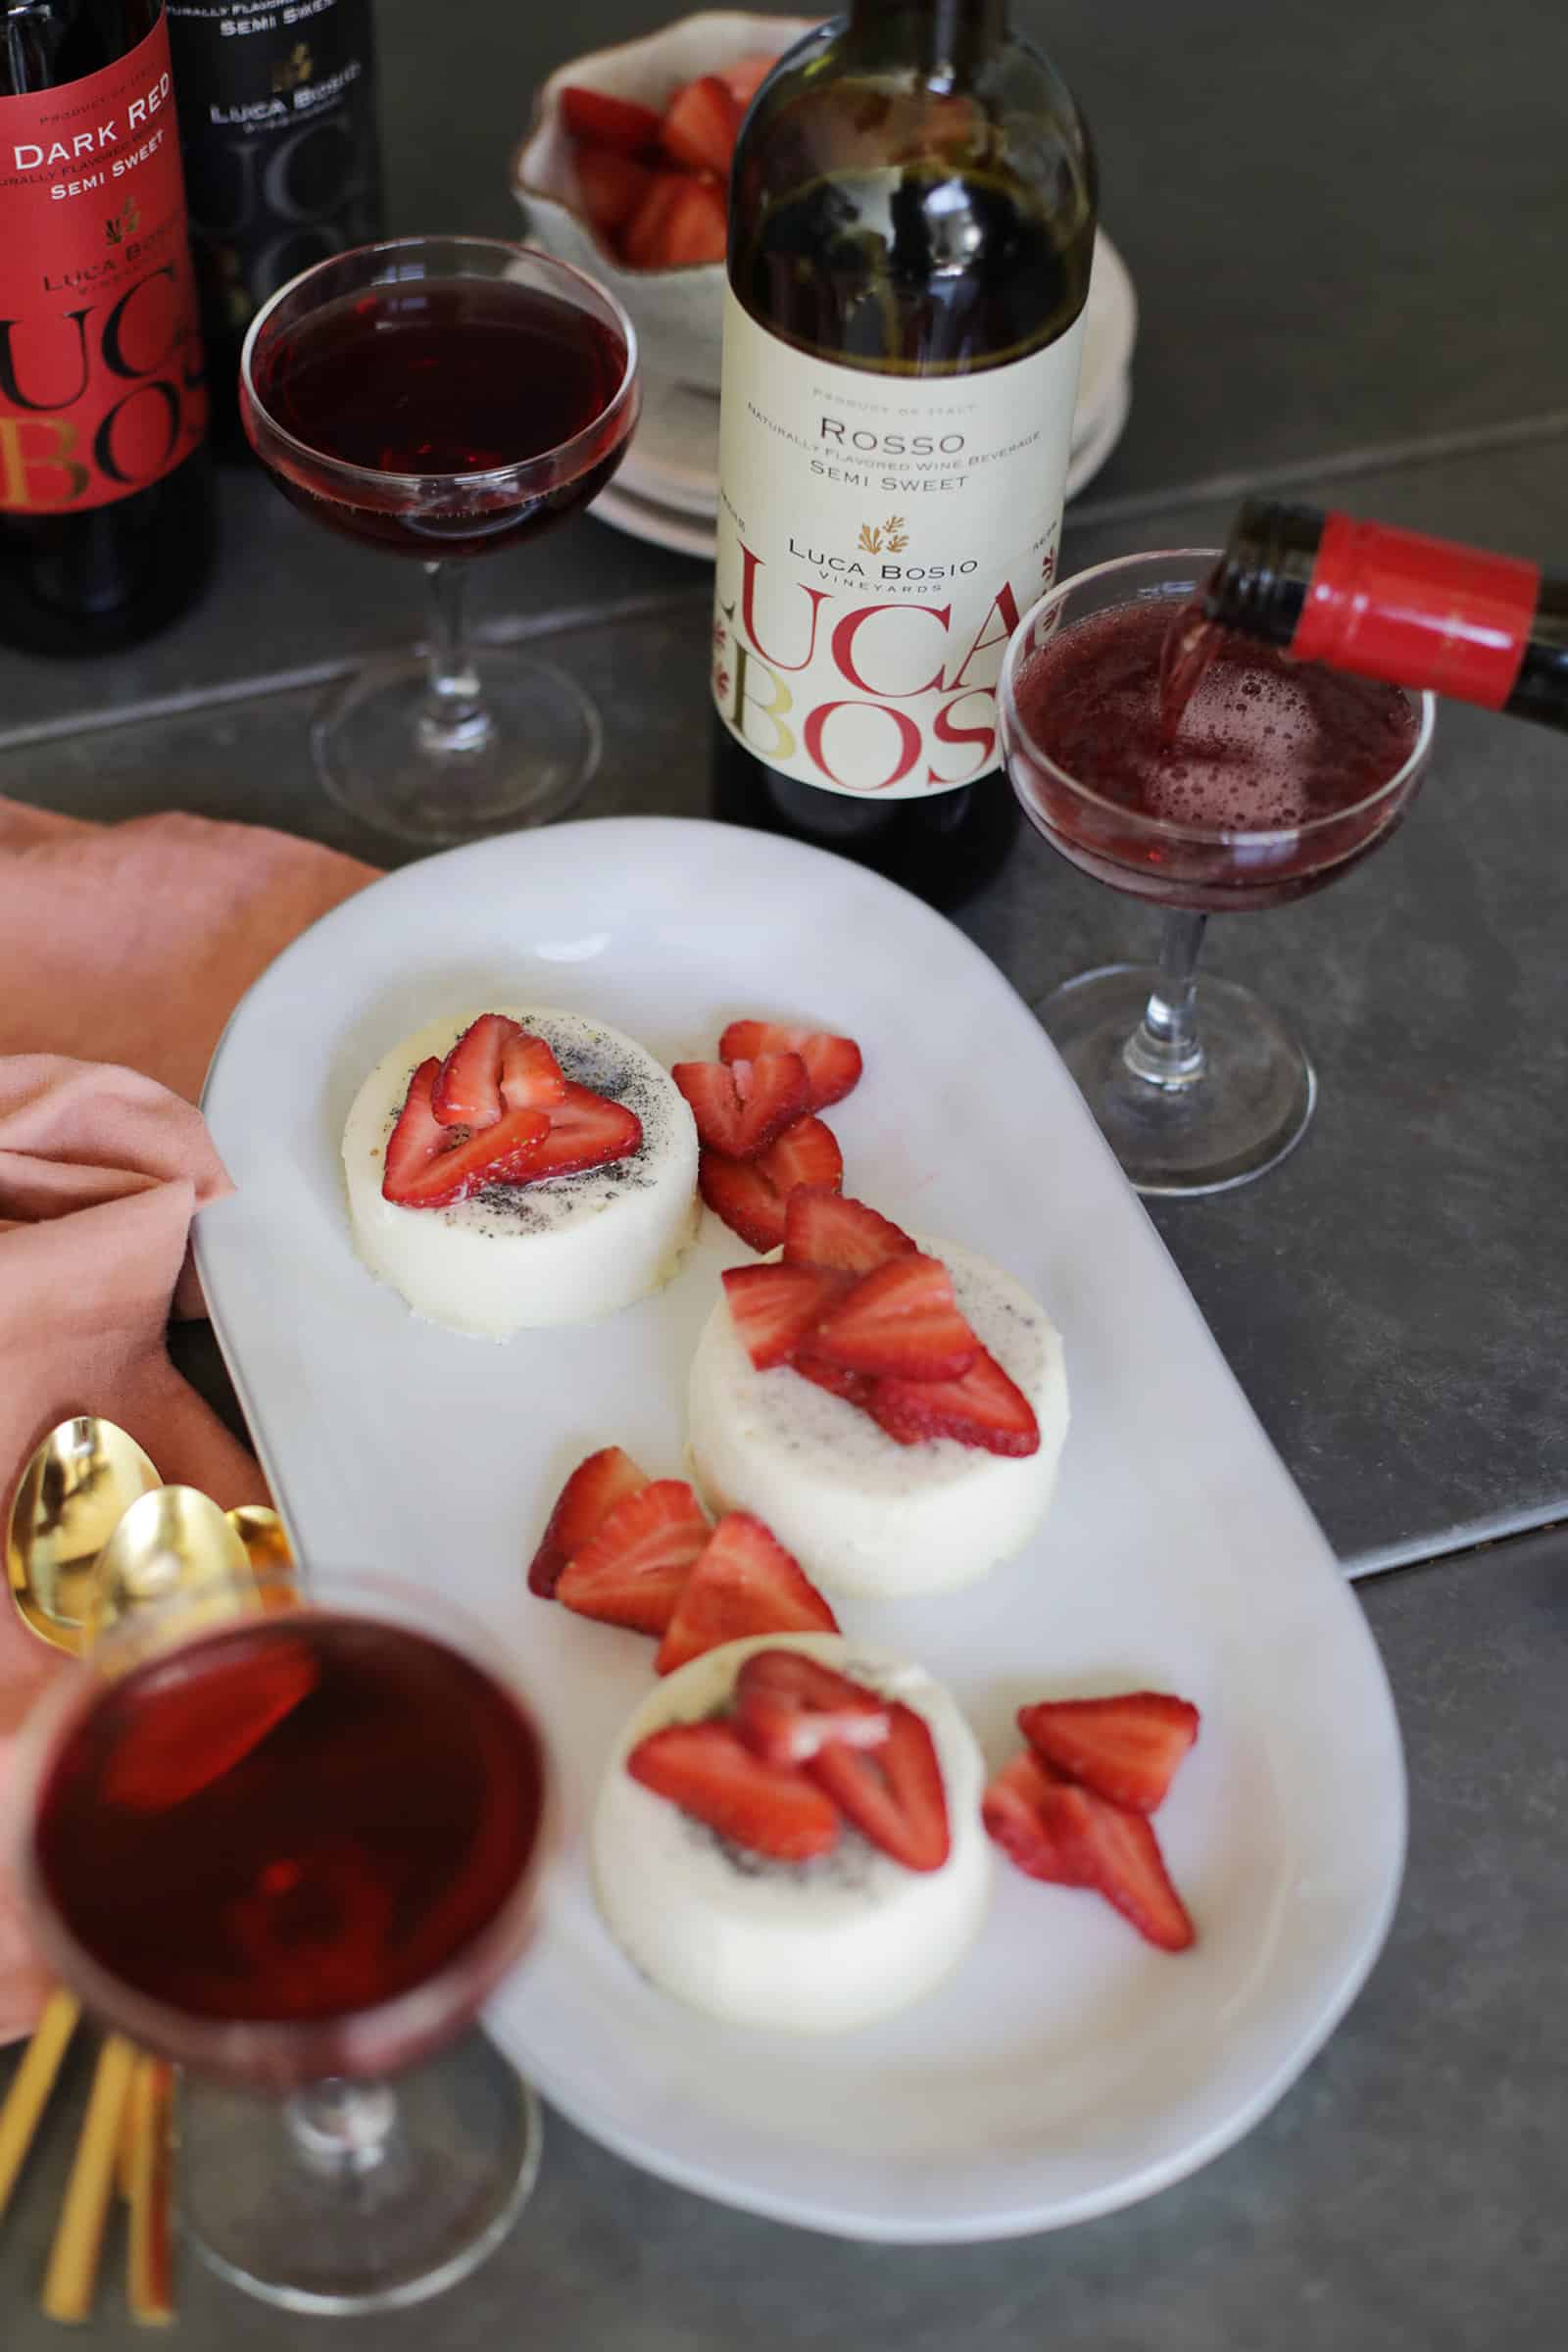 Wine Being Poured With Panna Cotta On Tray